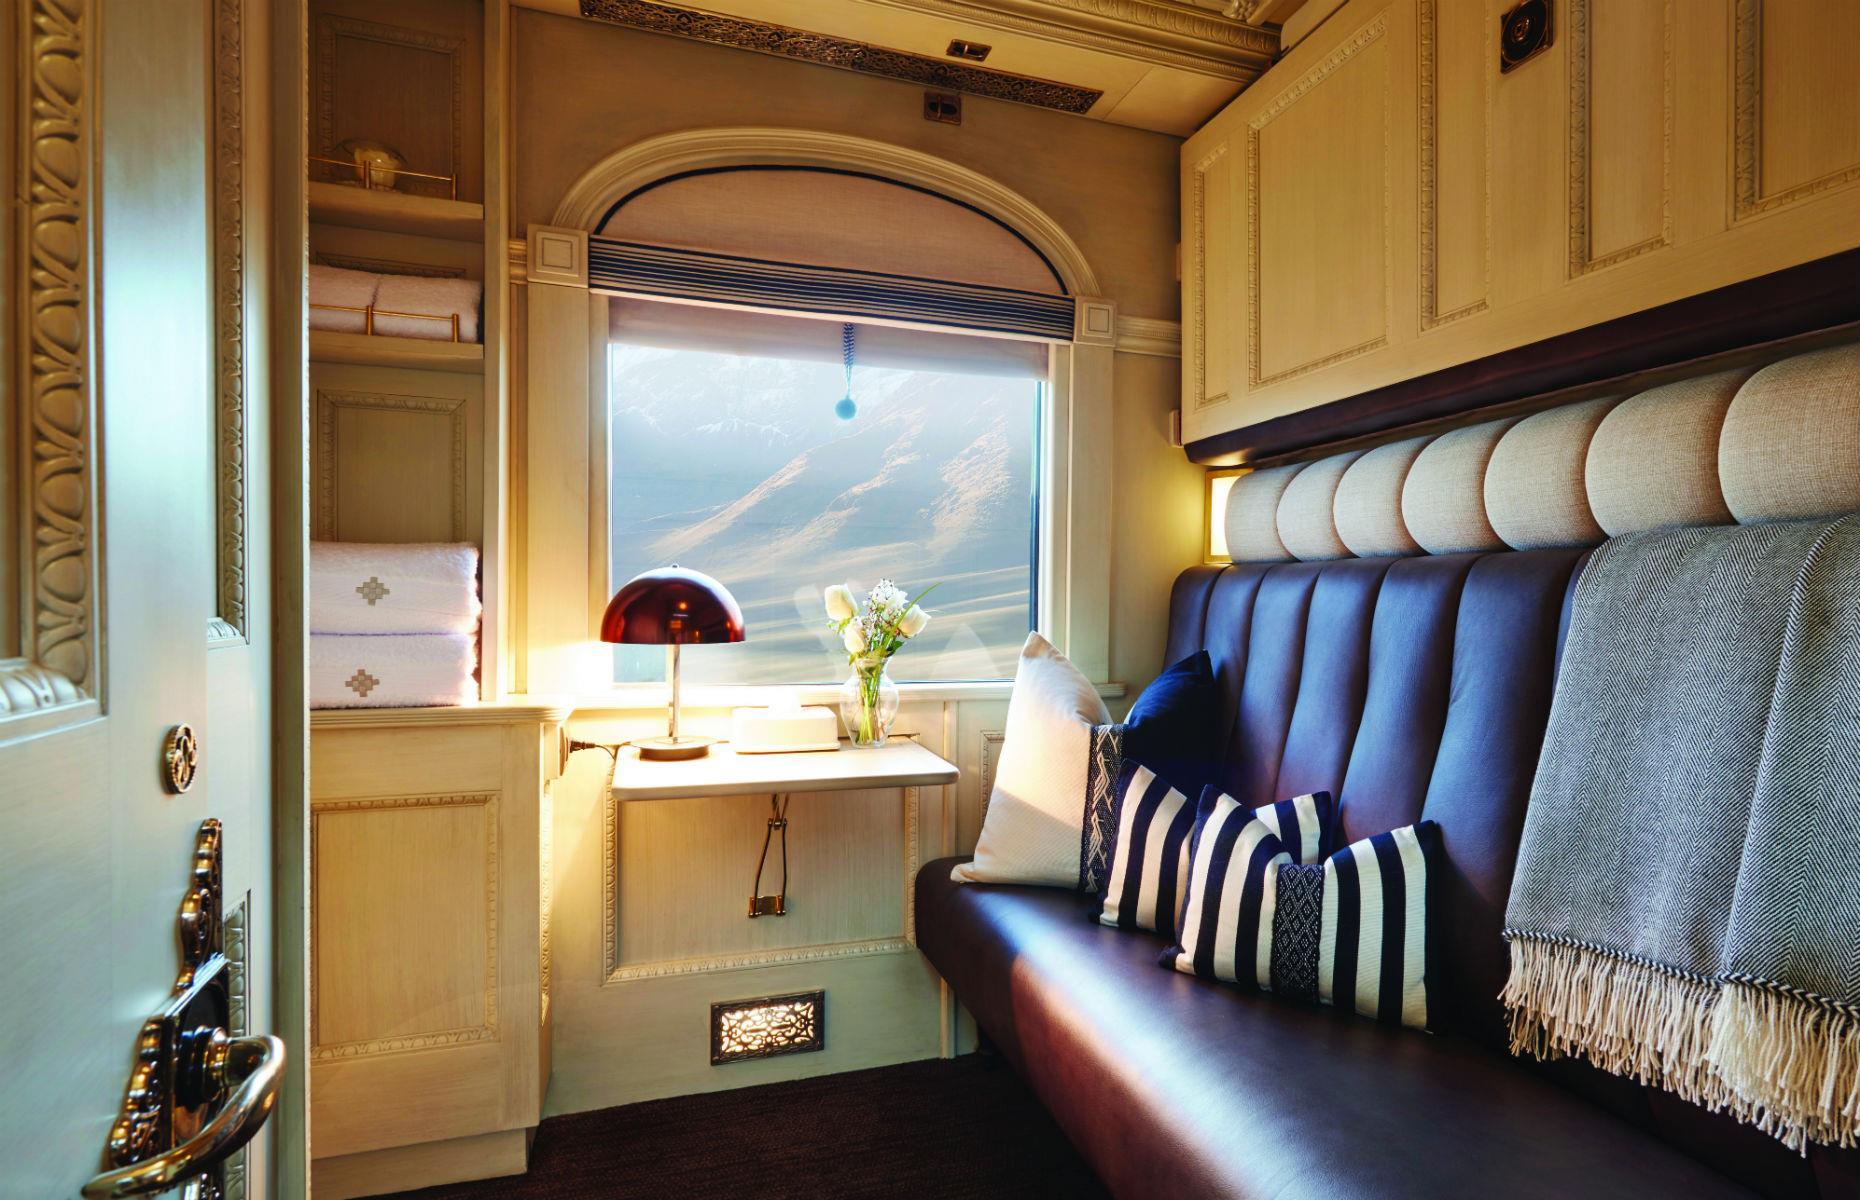 <p>The Belmond Andean Explorer's Peruvian Highlands journey departs from Cusco every Thursday morning. Included in the price tag are all your excursions listed in the itinerary, as well as all onboard accommodation, meals, beverages and entertainment.</p>